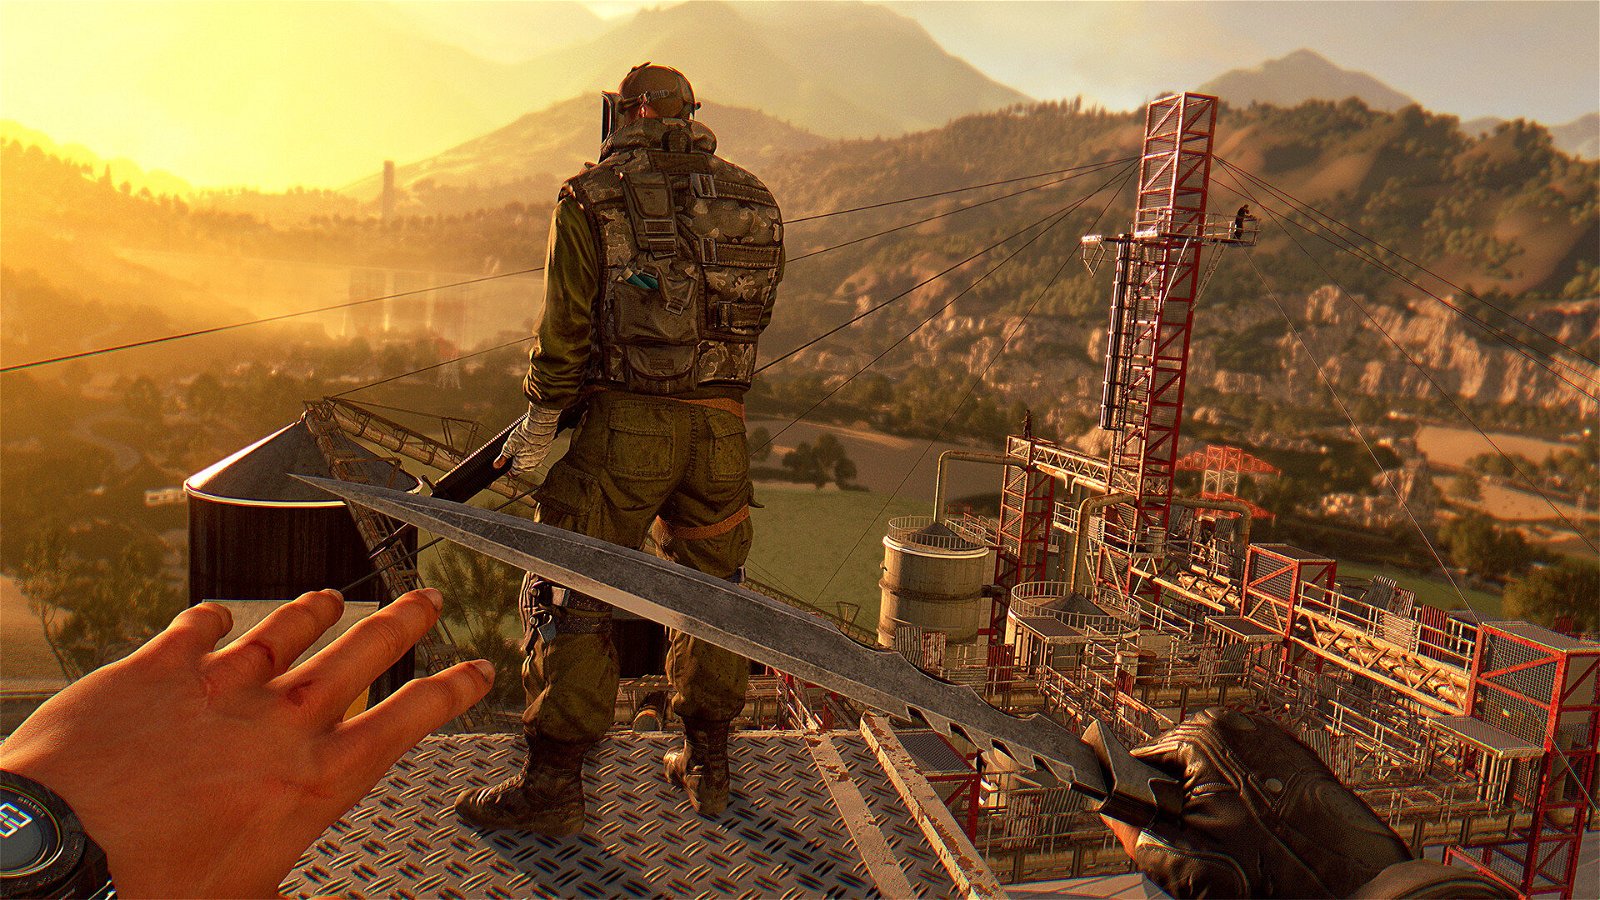 dying light xbox one review